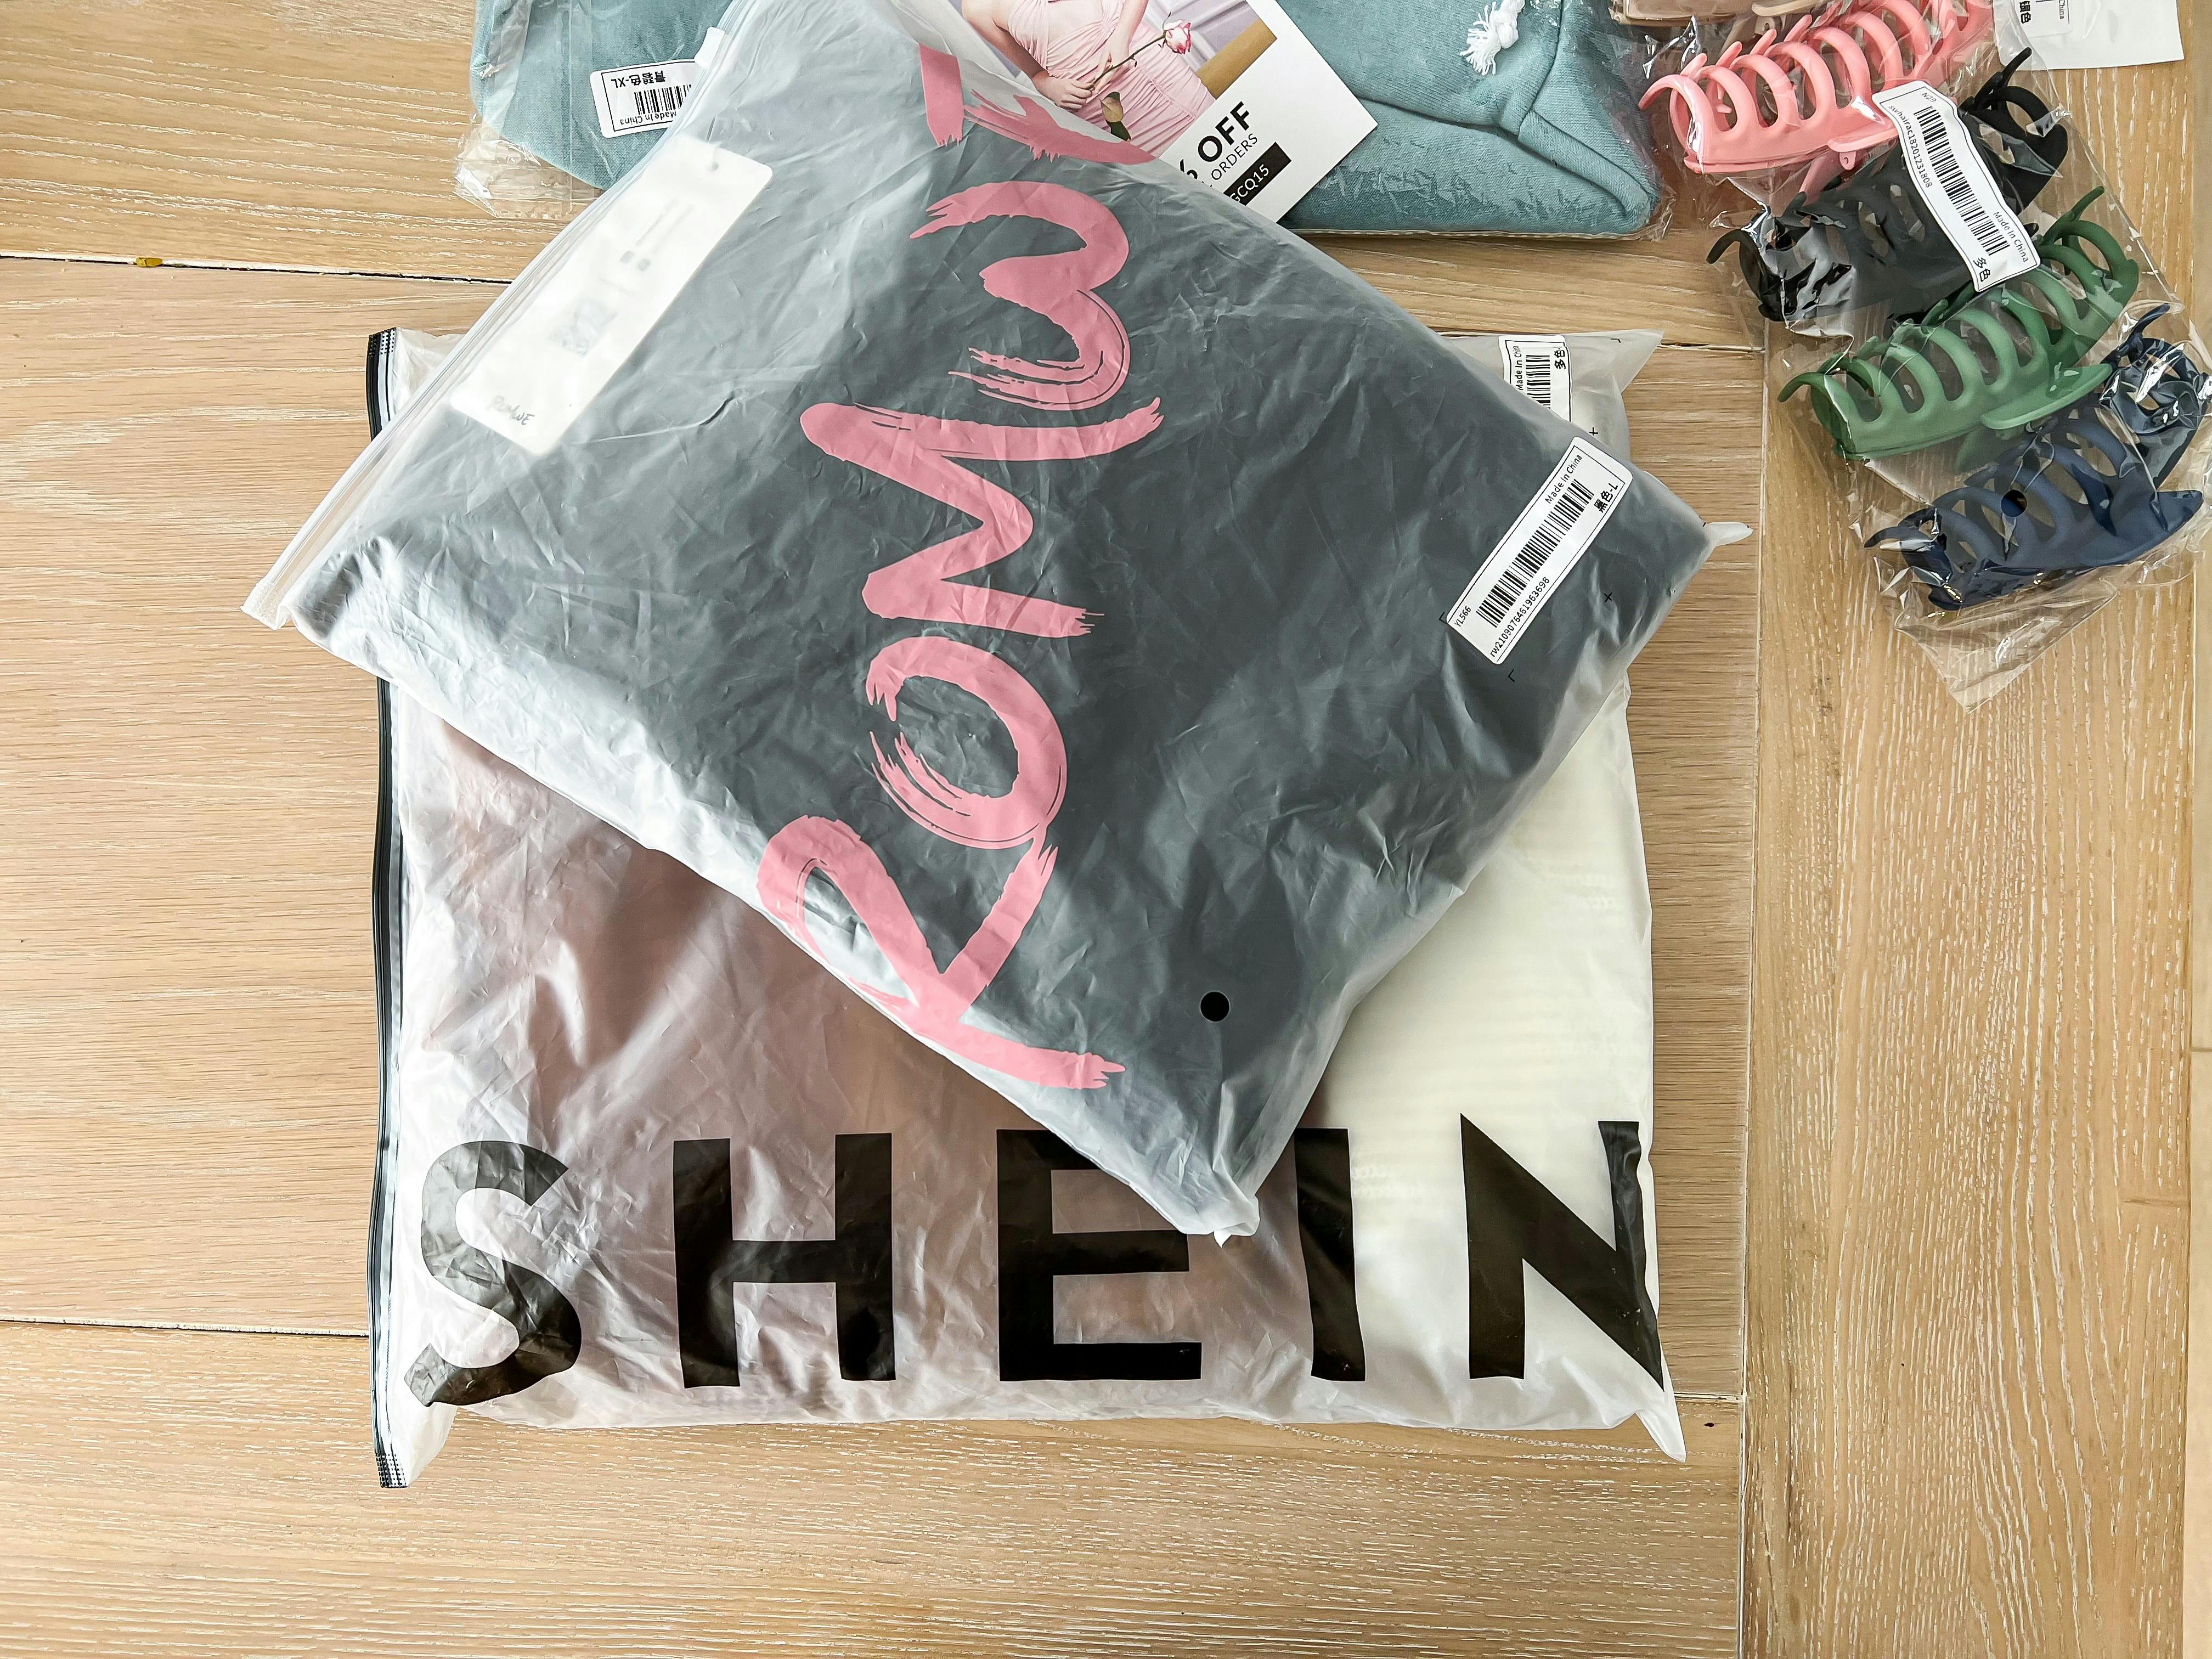 How To Get Deep Discounts on SheIn Clothing - The Krazy Coupon Lady